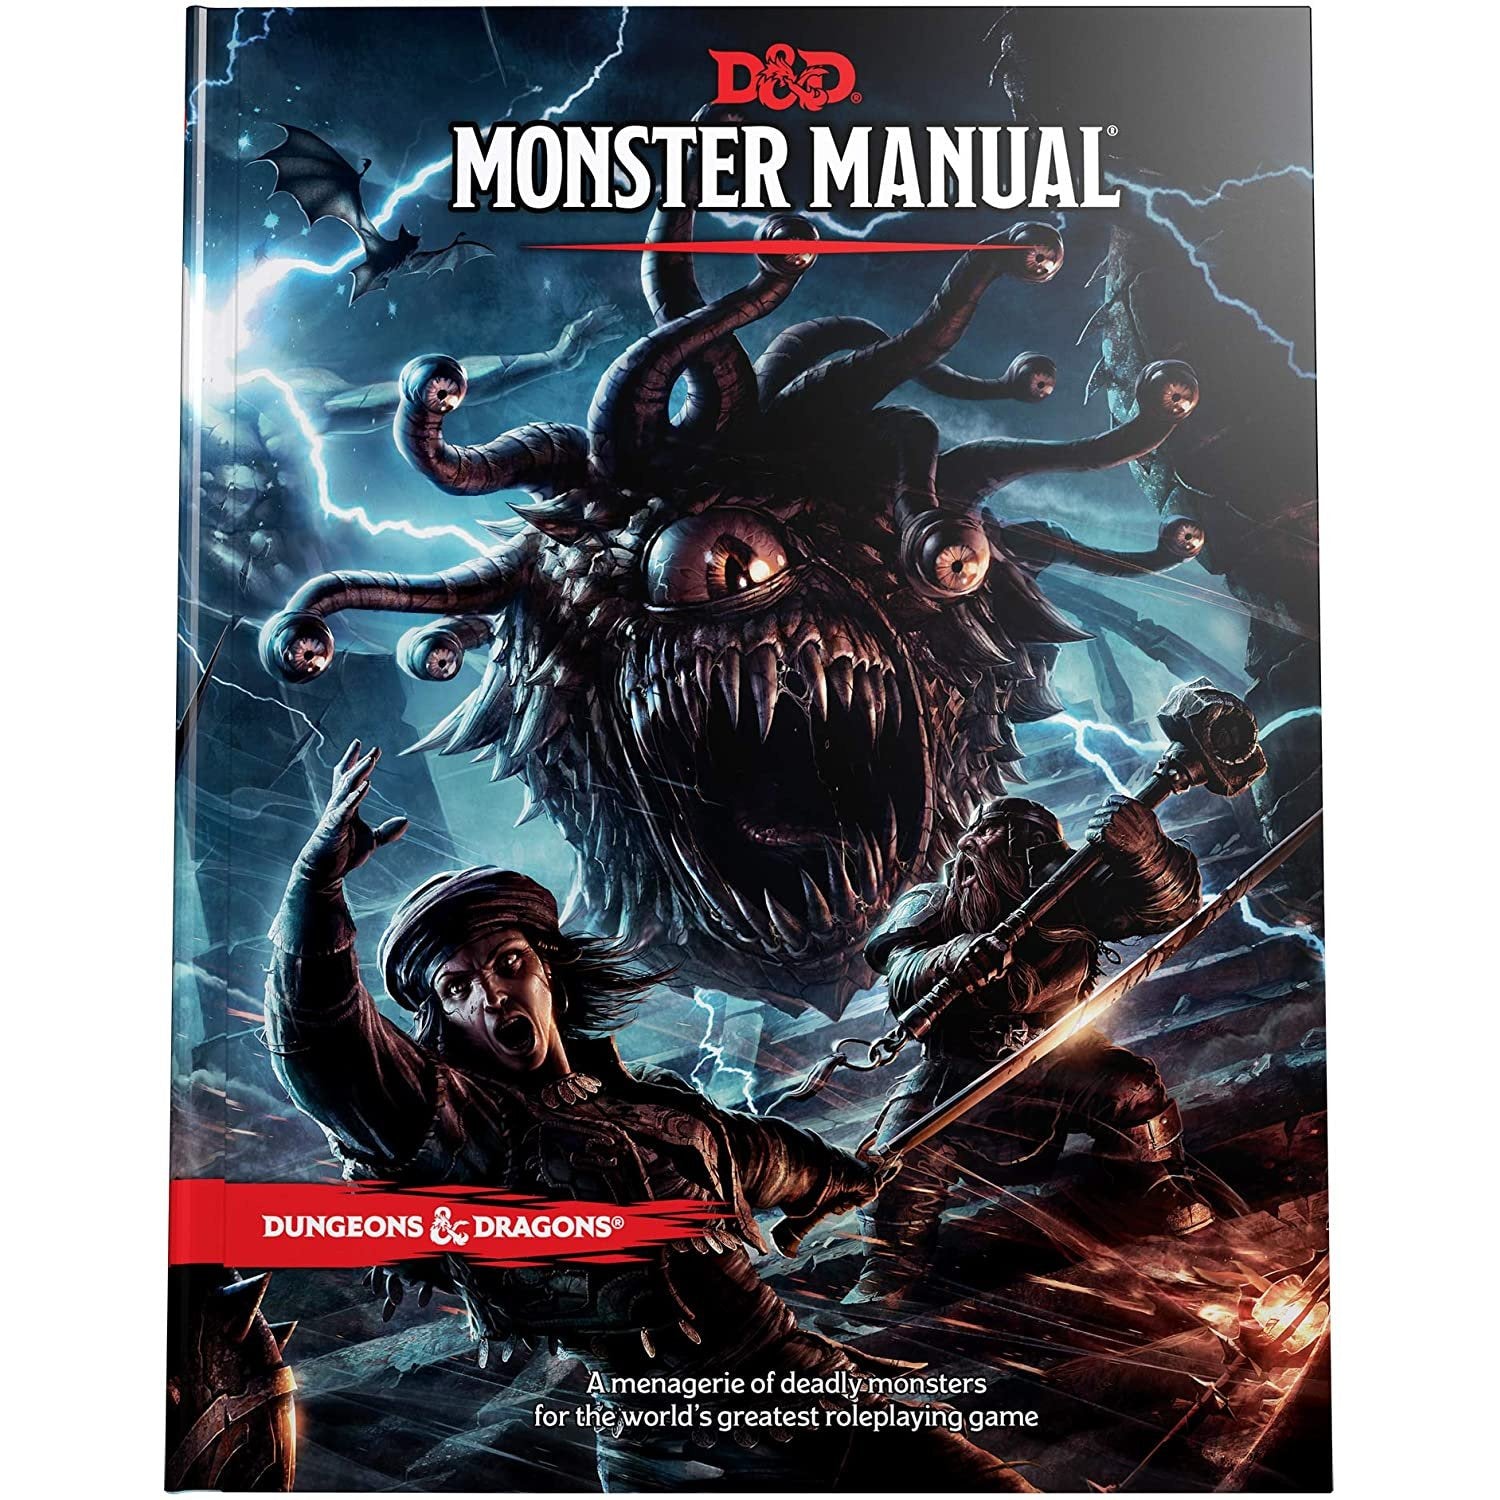 D&D Monster Manual 5th Edition Hardcover